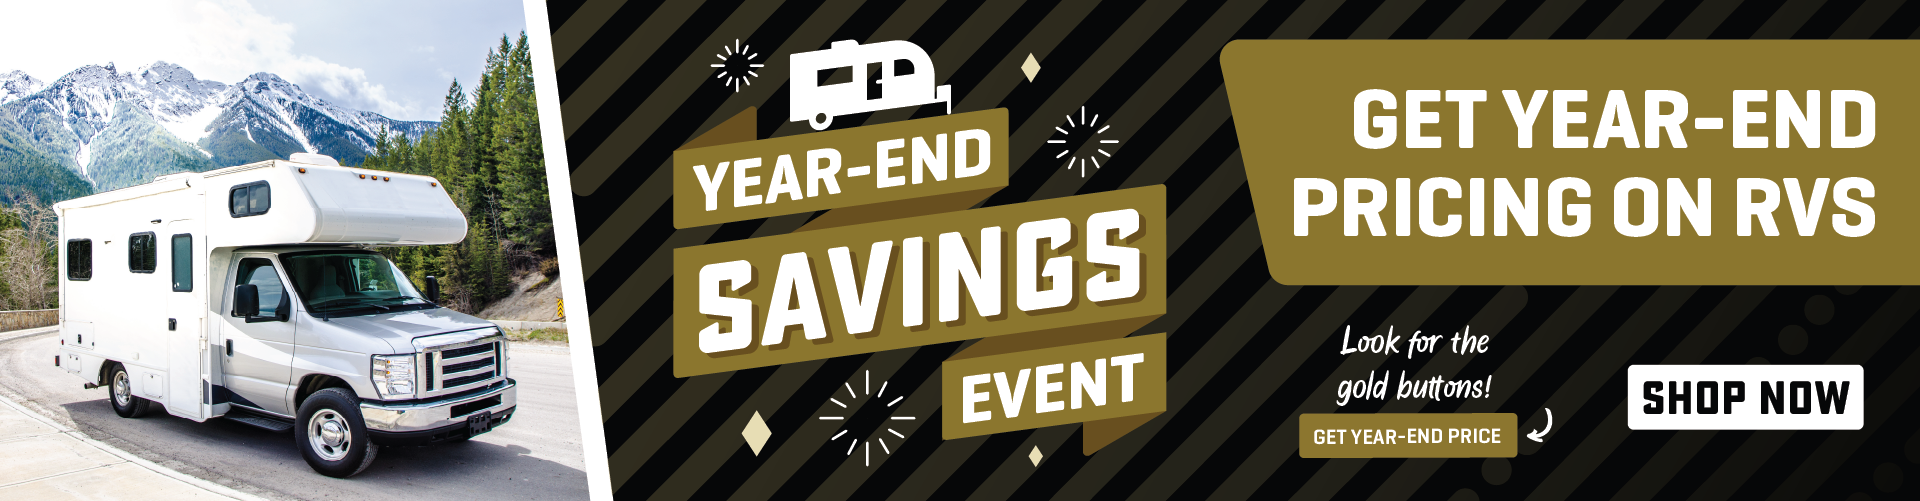 Year-End Savings Event